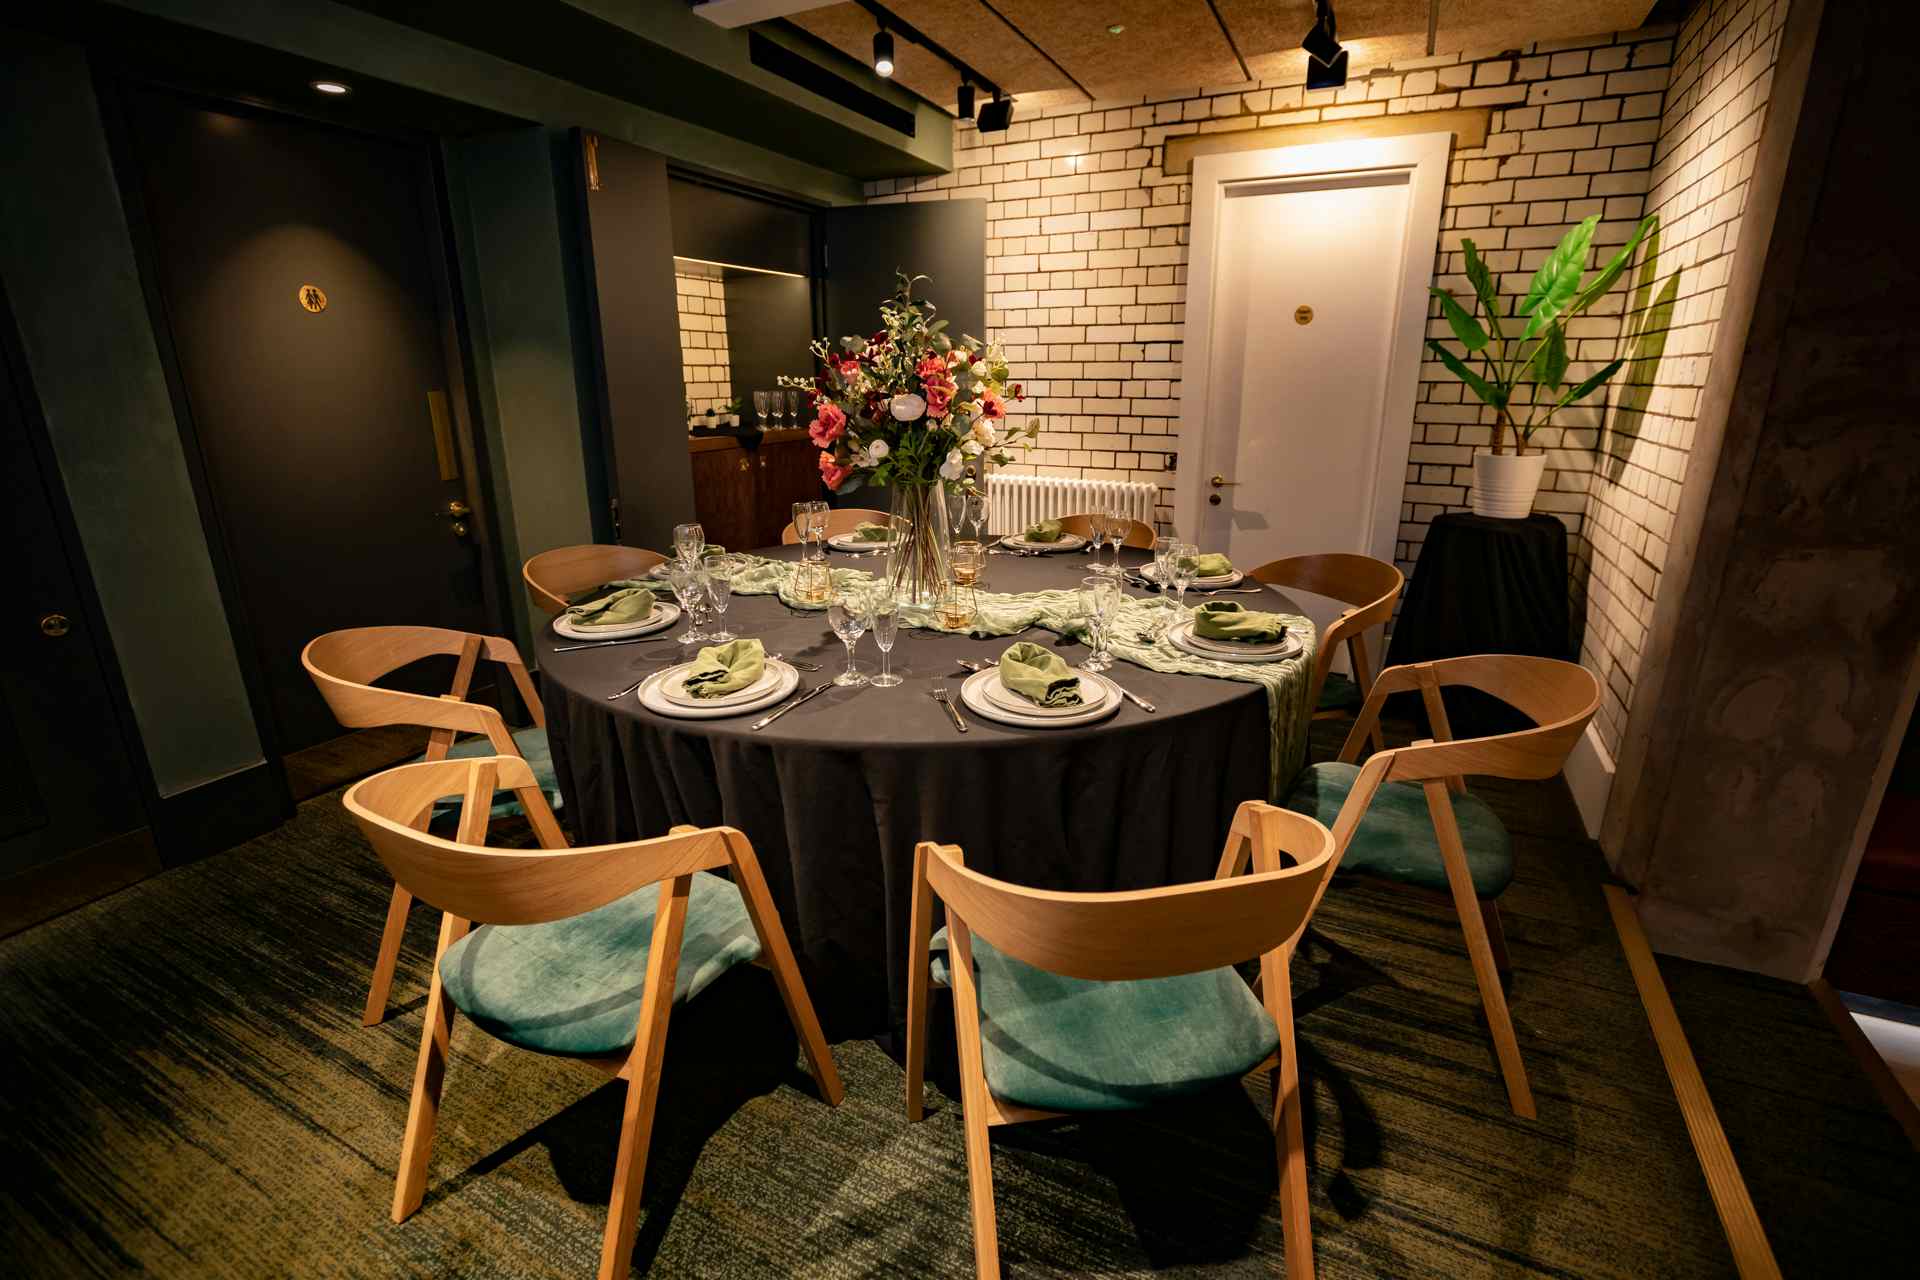 The Taffner Suite - Private Receptions, The Shaftesbury Theatre